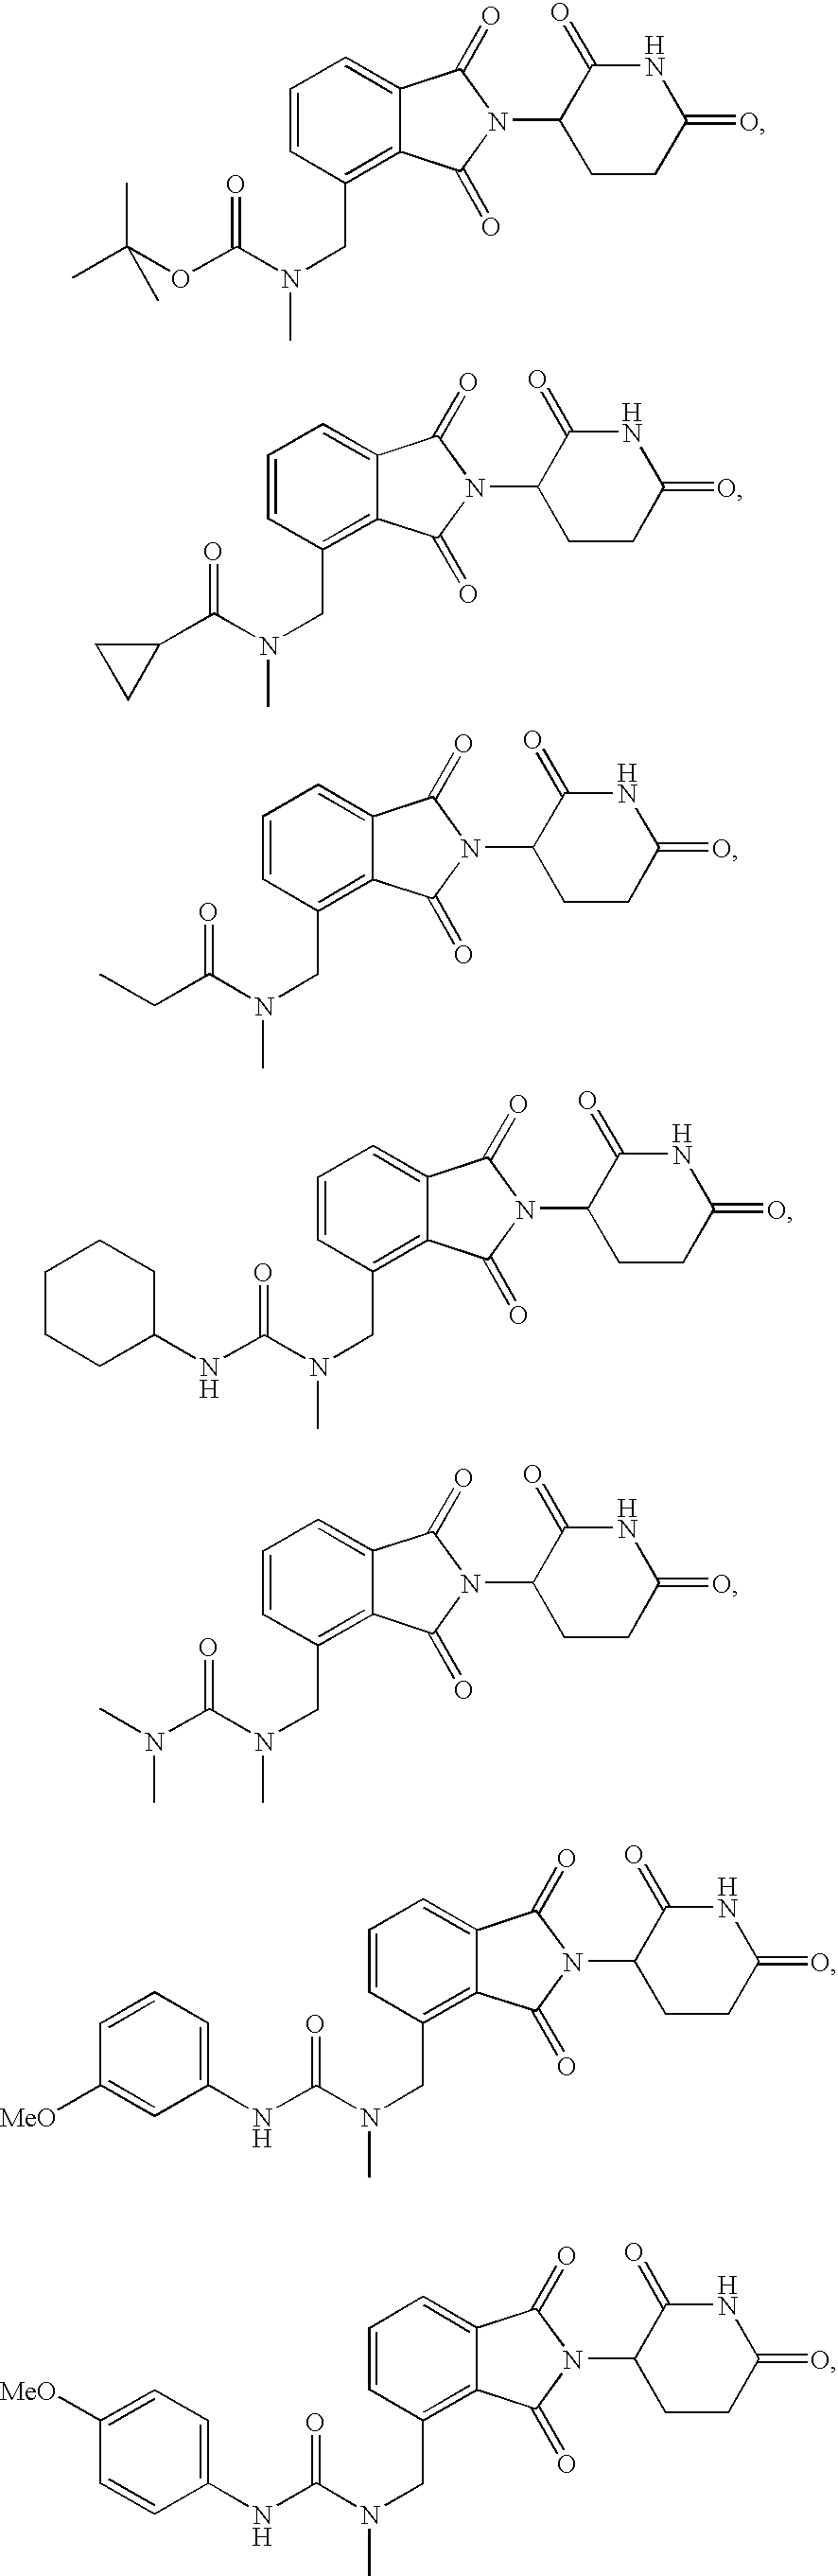 N-methylaminomethyl isoindole compounds and compositions comprising and methods of using the same